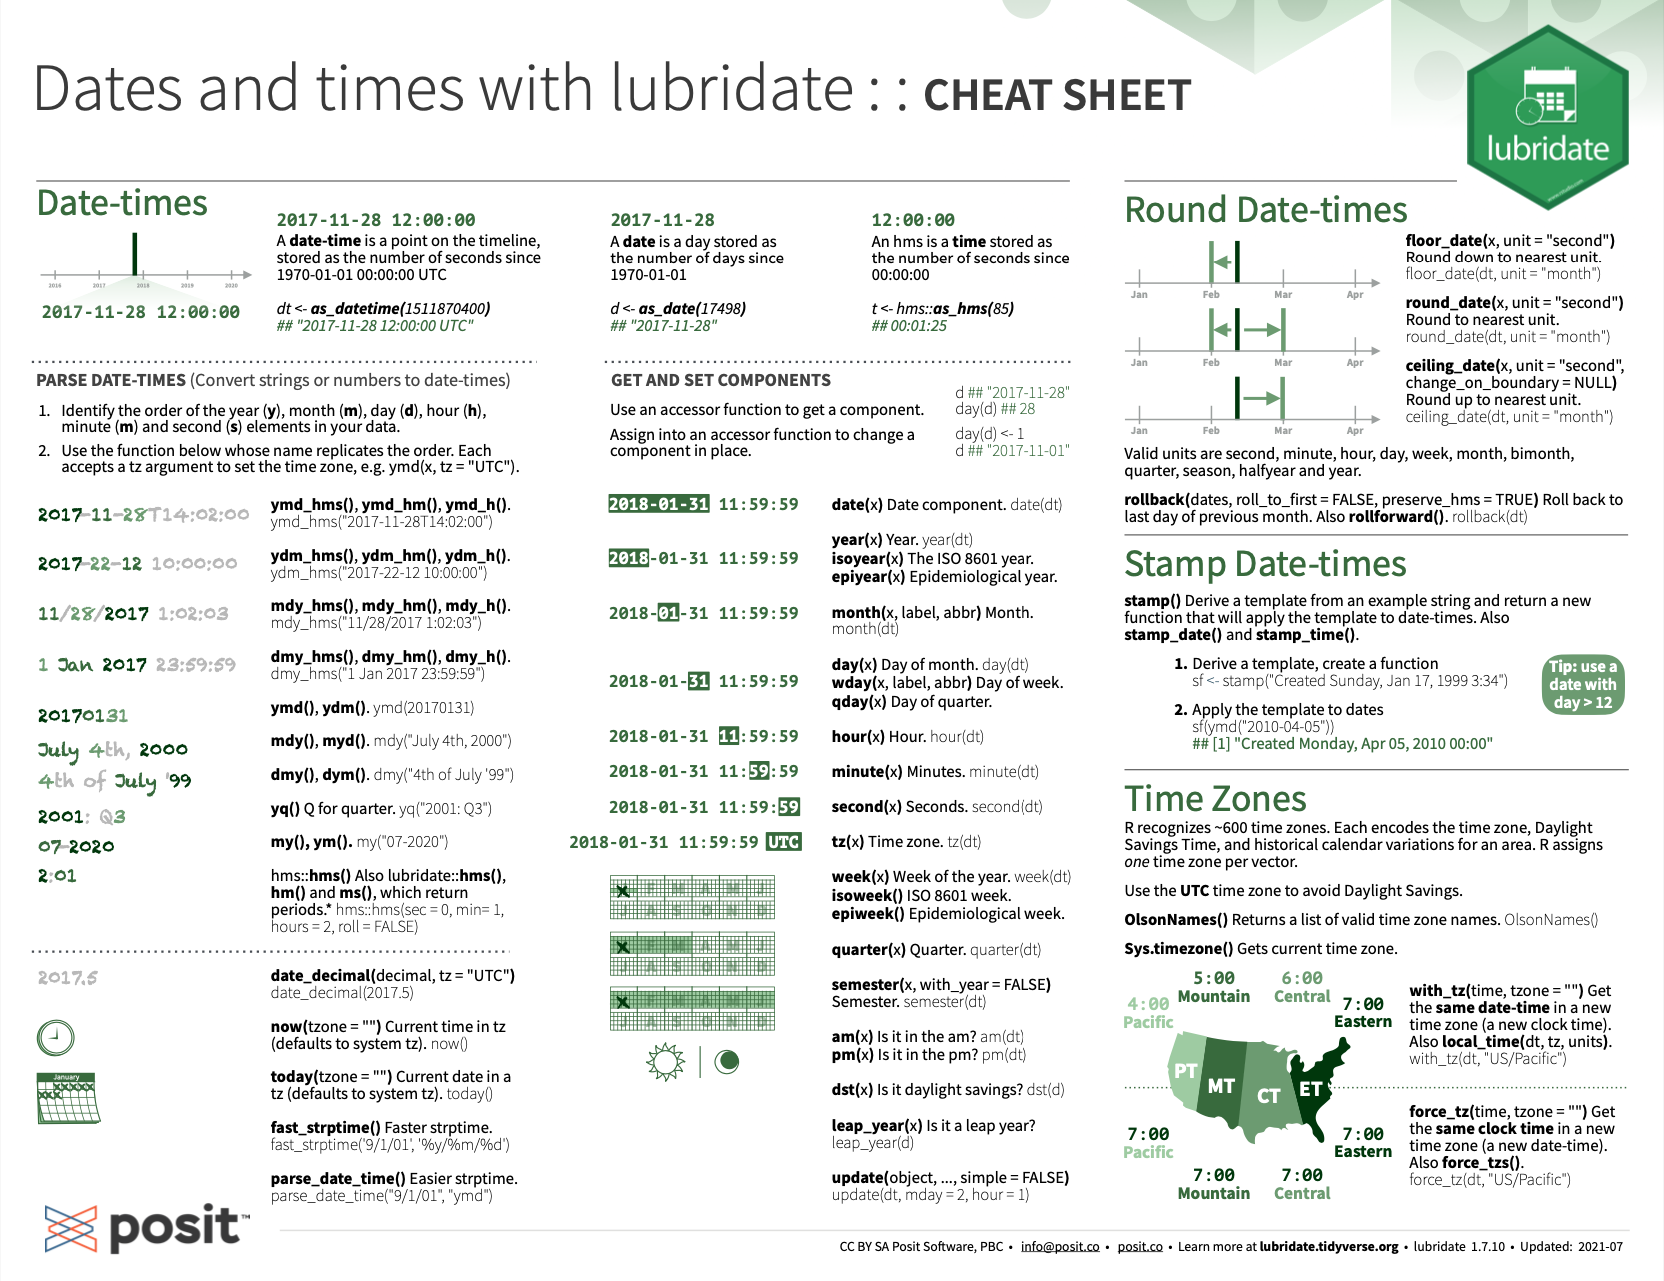 Manipulate dates and times with **lubridate**<br>from [Posit cheatsheets](https://posit.co/resources/cheatsheets/).